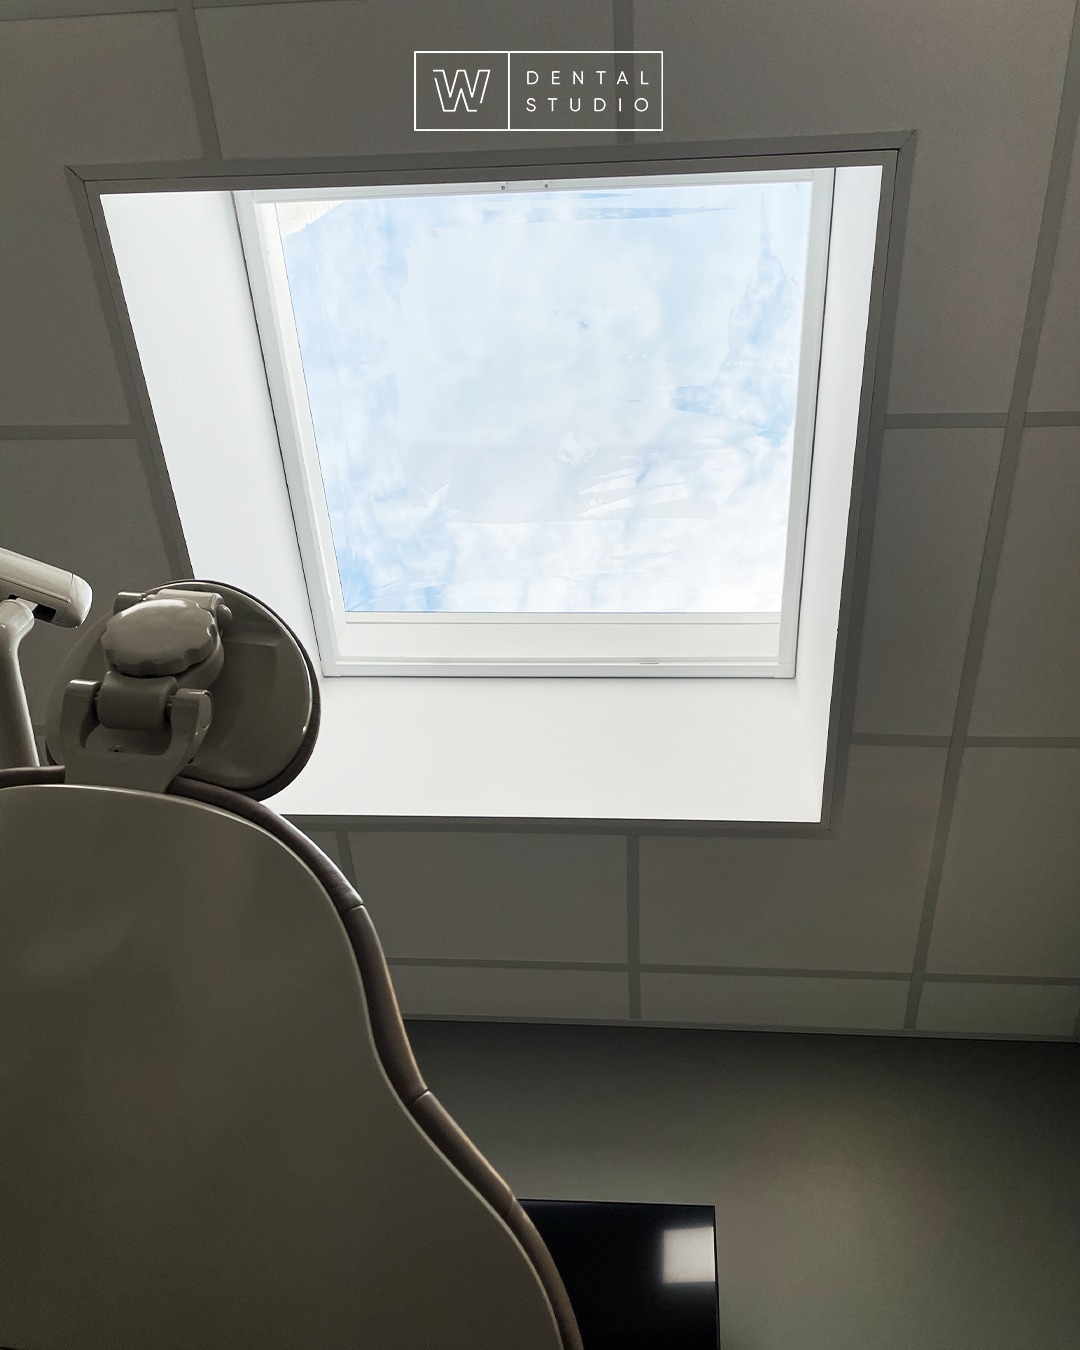 Enjoy the view from your appointment chair 😍⠀Contact us today to book your first visit! 

📞 613-564-3300
📍 270 Richmond Rd, Ottawa, ON
🖥 https://www.wdentalstudio.com
📧 info@wdentalstudio.com